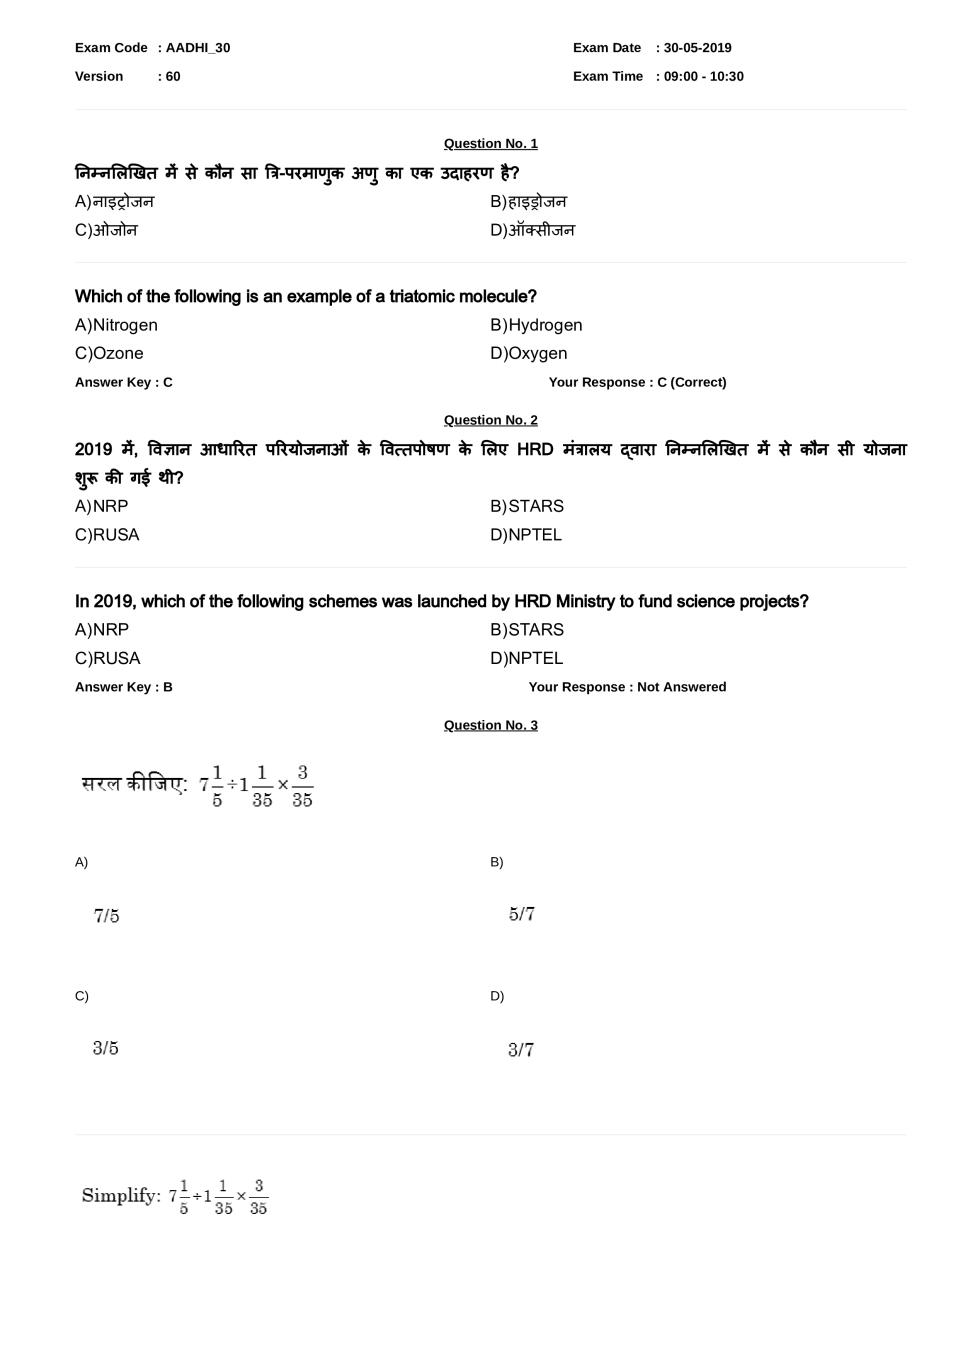 RRB JE Question Paper with Answers for 30 May 2019 Exam Shift 1 - Page 1